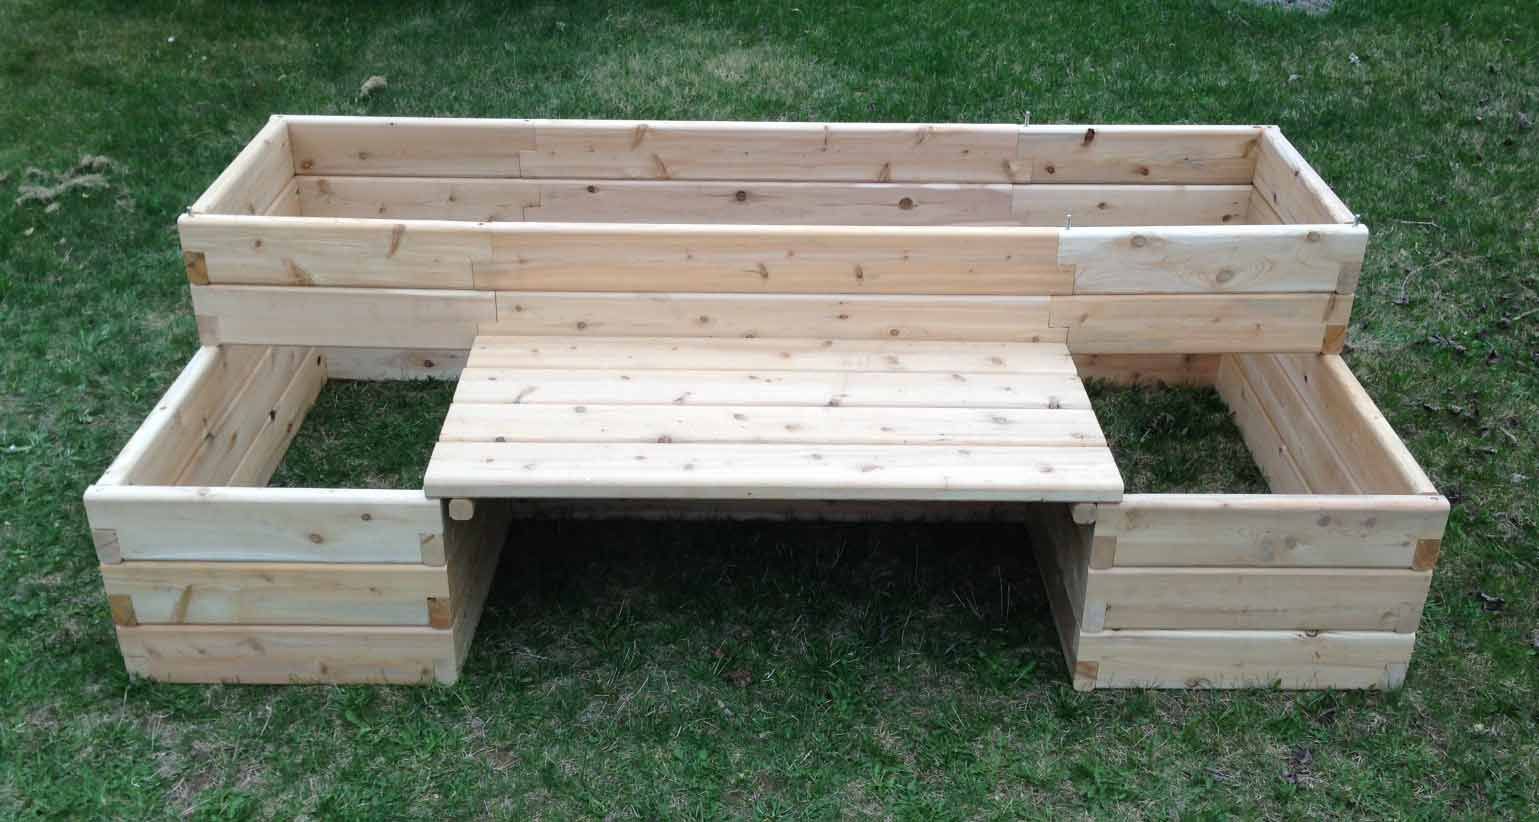 raised bed with bench – I REALLY like this!